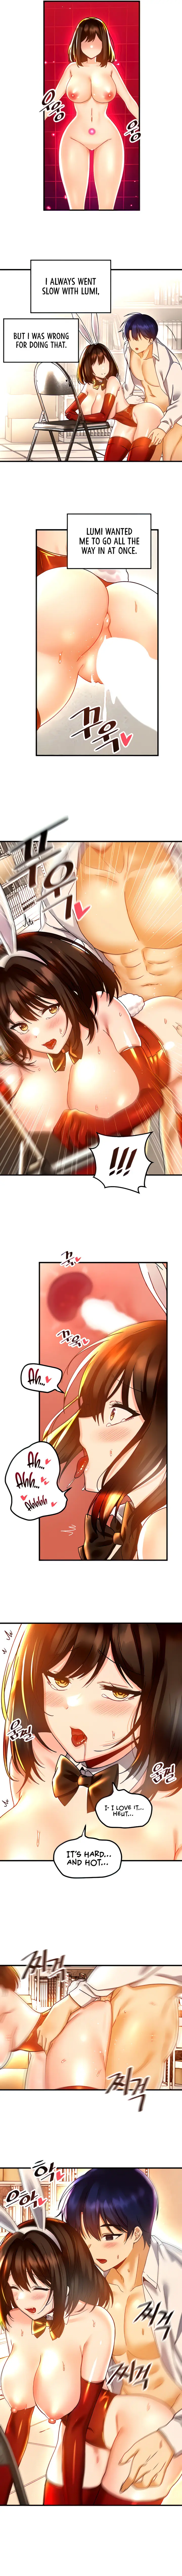 trapped-in-the-academys-eroge-chap-44-1